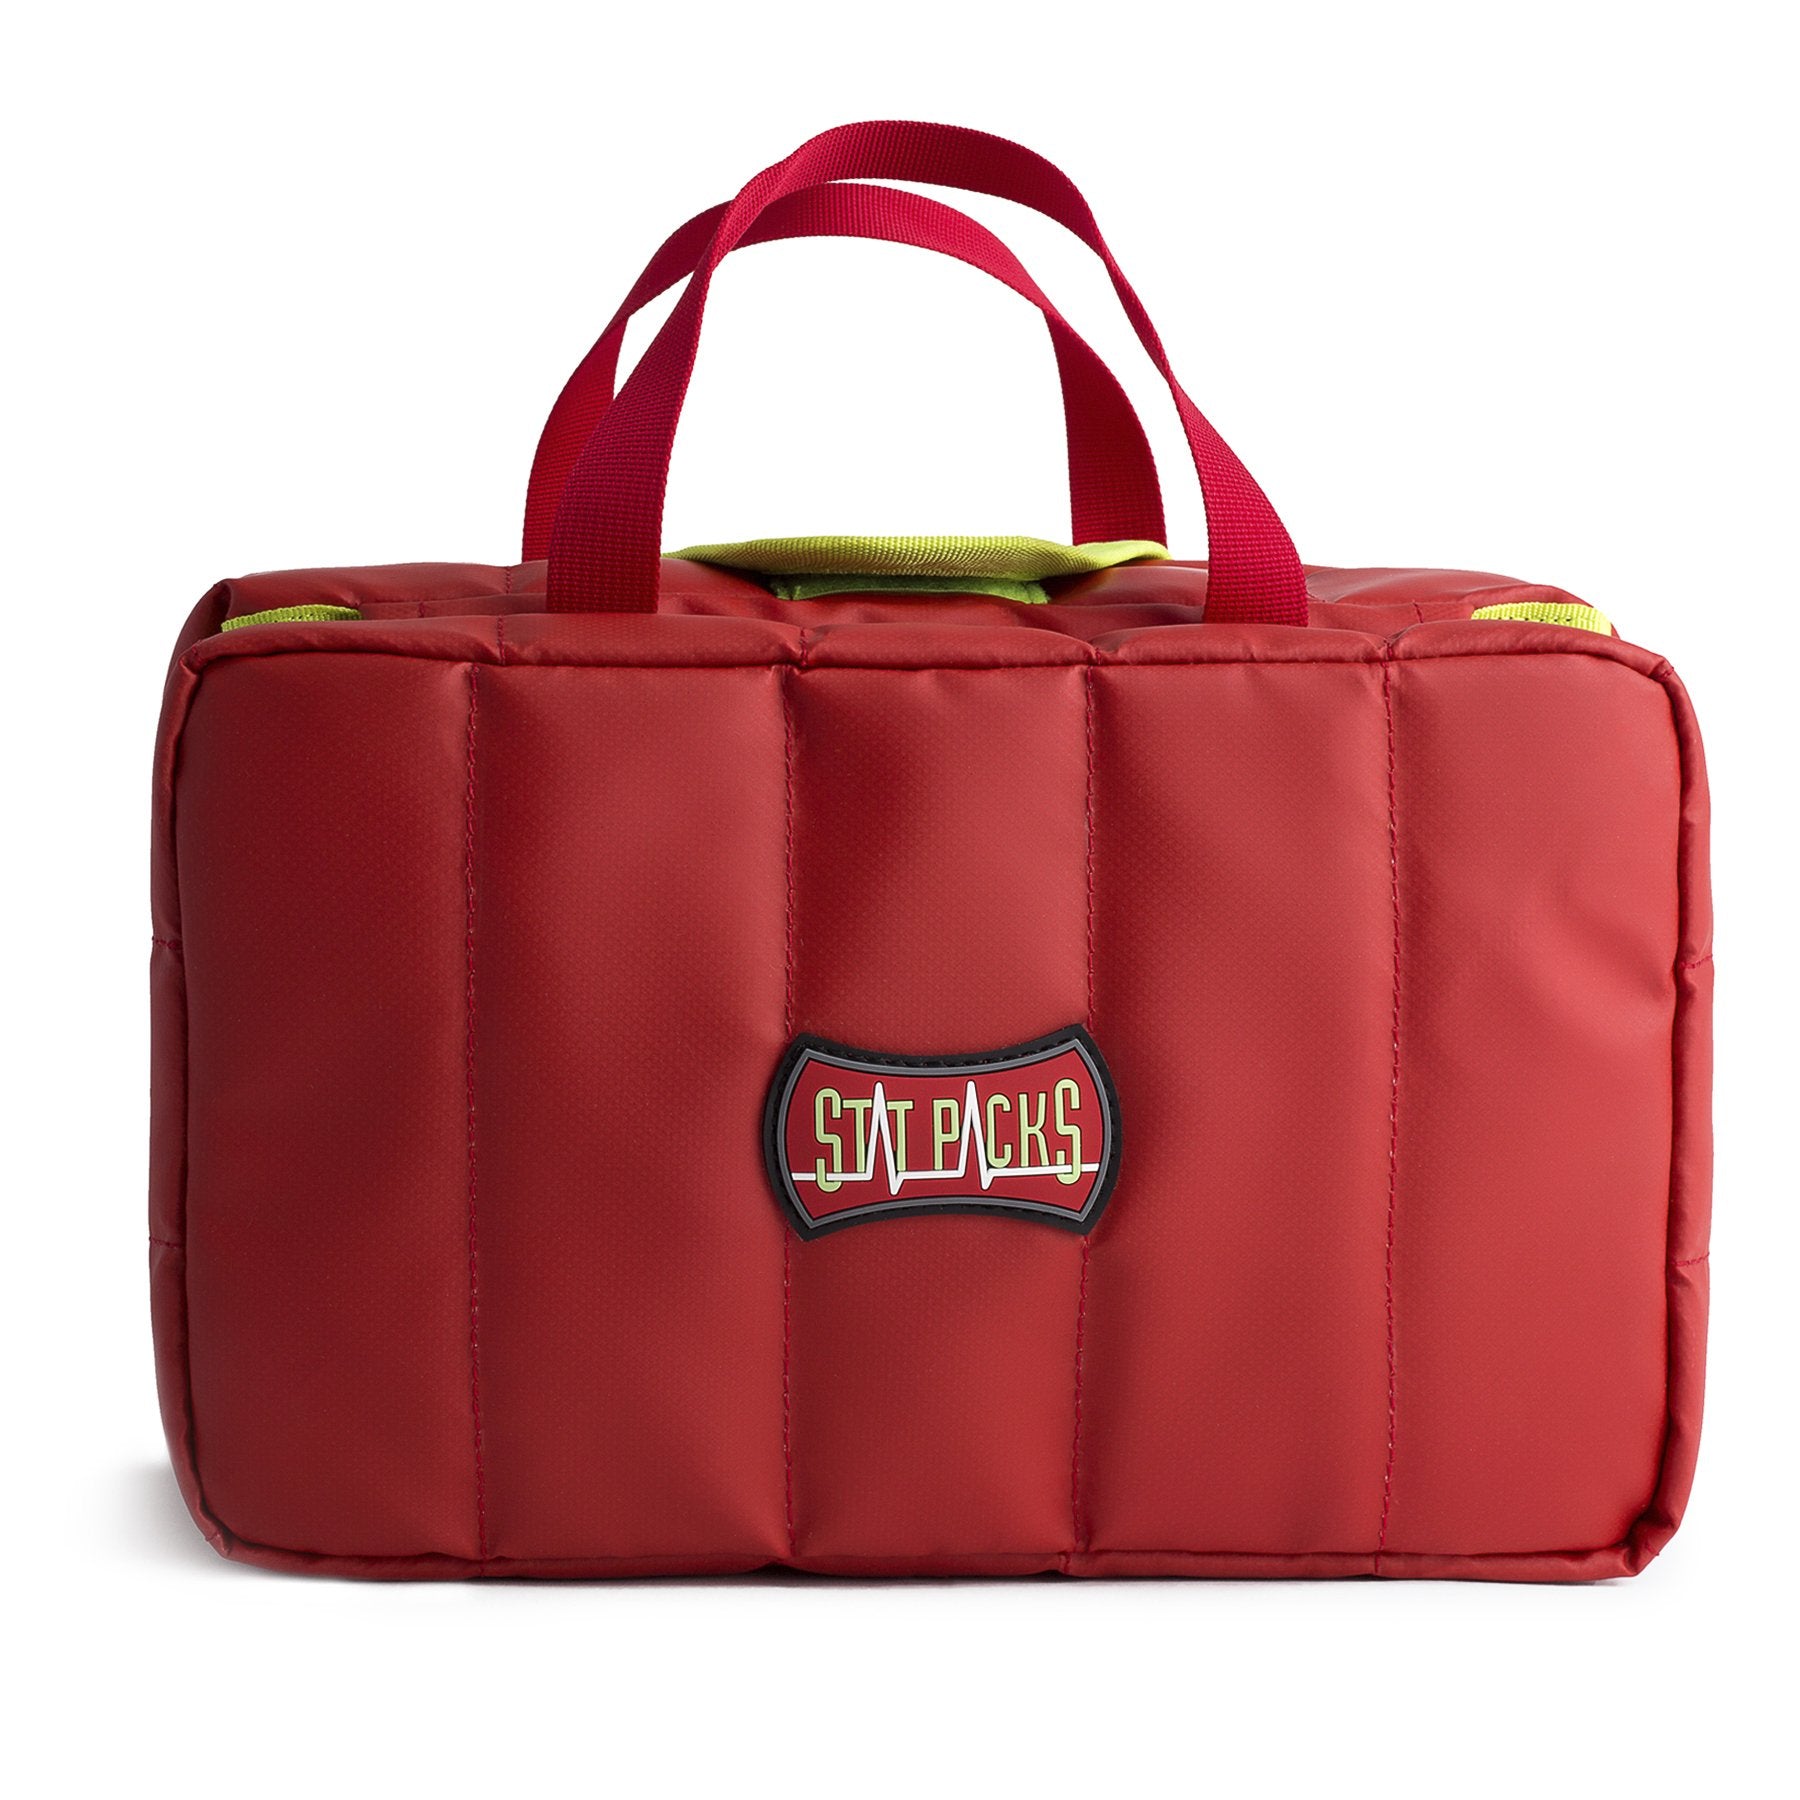 StatPacks Inc - Equipment and Physician Bags